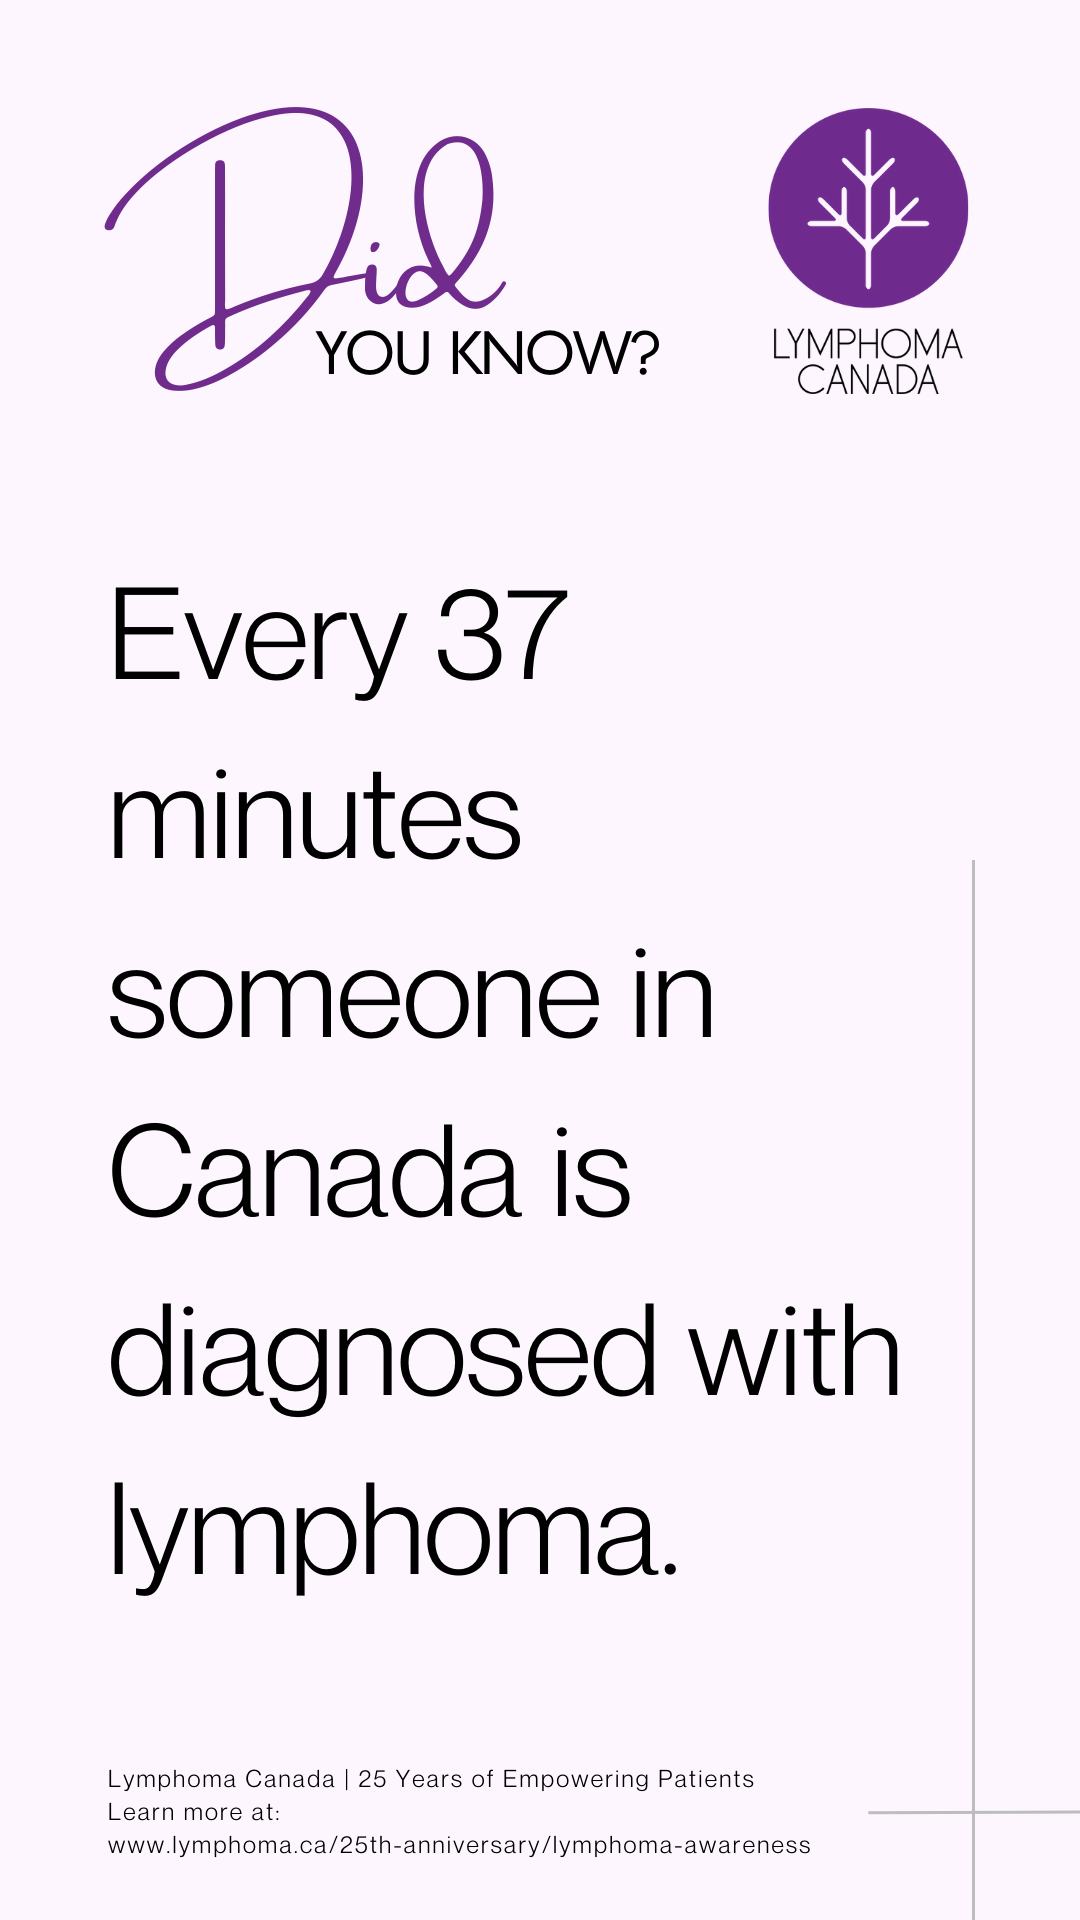 Story Infographic - Every 37 minutes someone in Canada is diagnosed with lymphoma